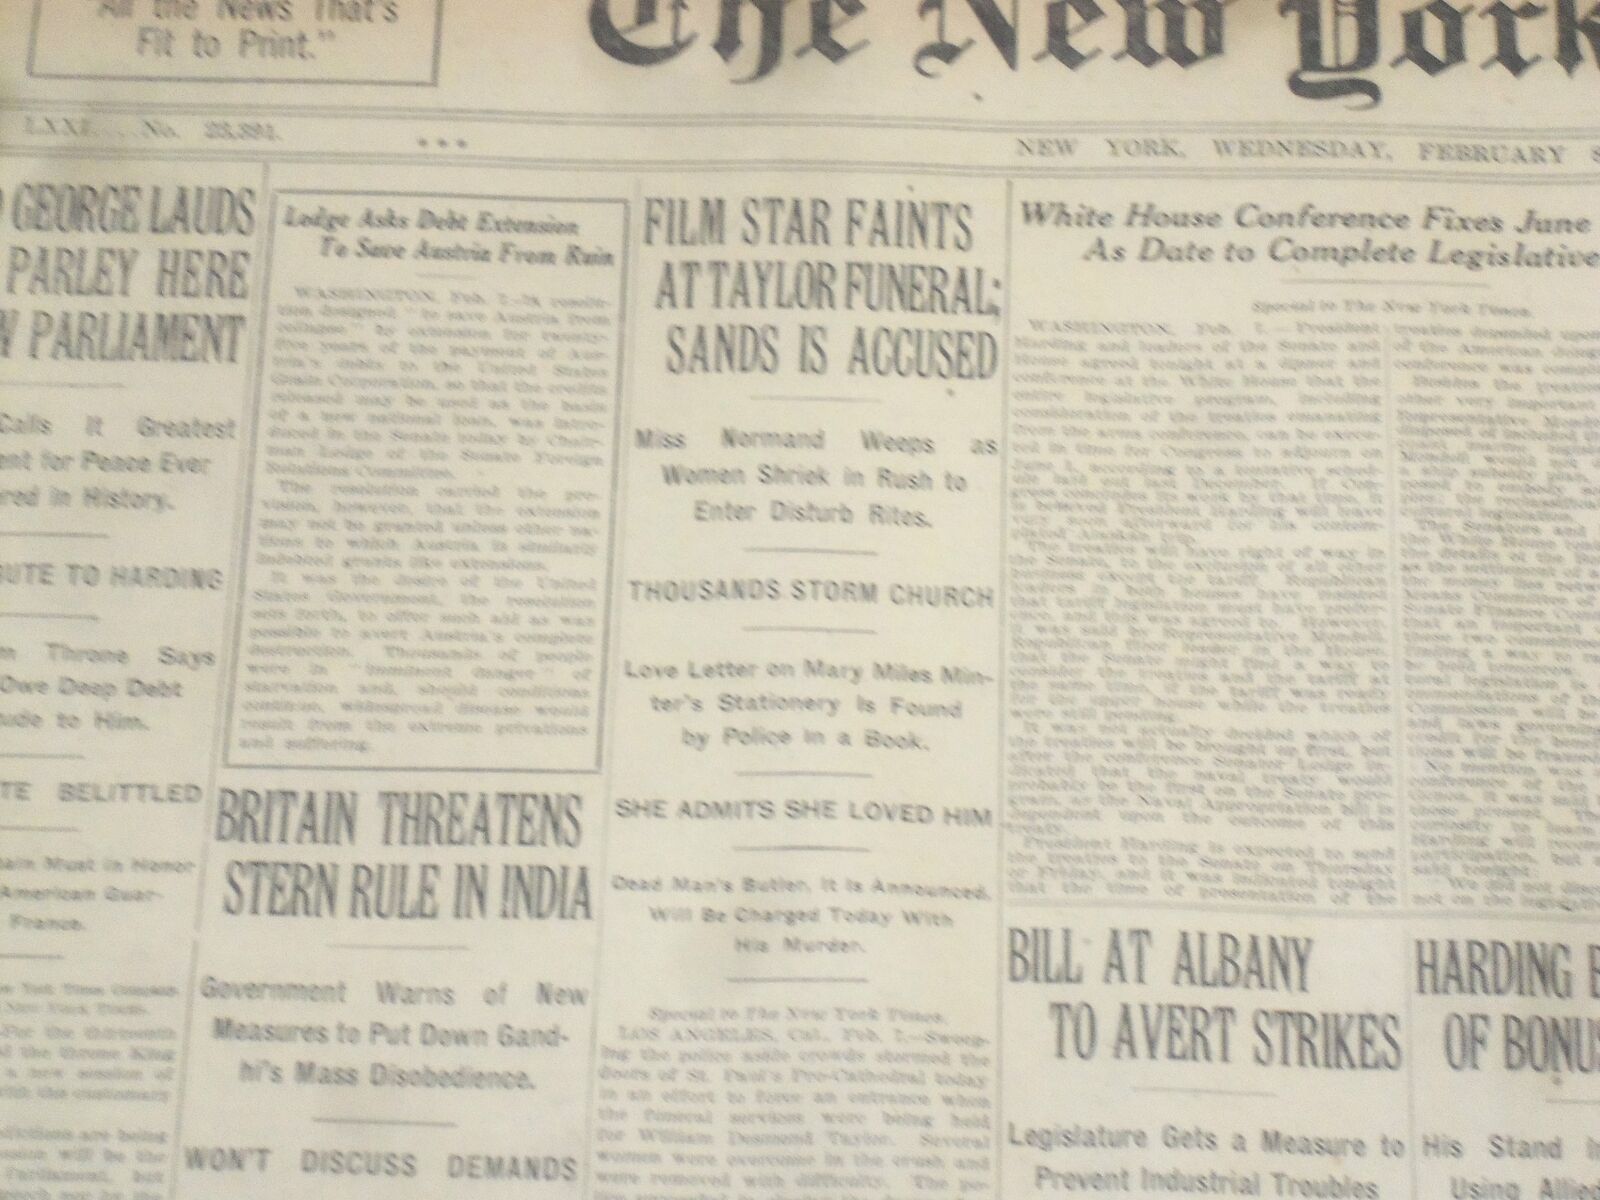 1922 FEBRUARY 8 NEW YORK TIMES - FILM STAR FAINTS AT TAYLOR FUNERAL - NT 9006